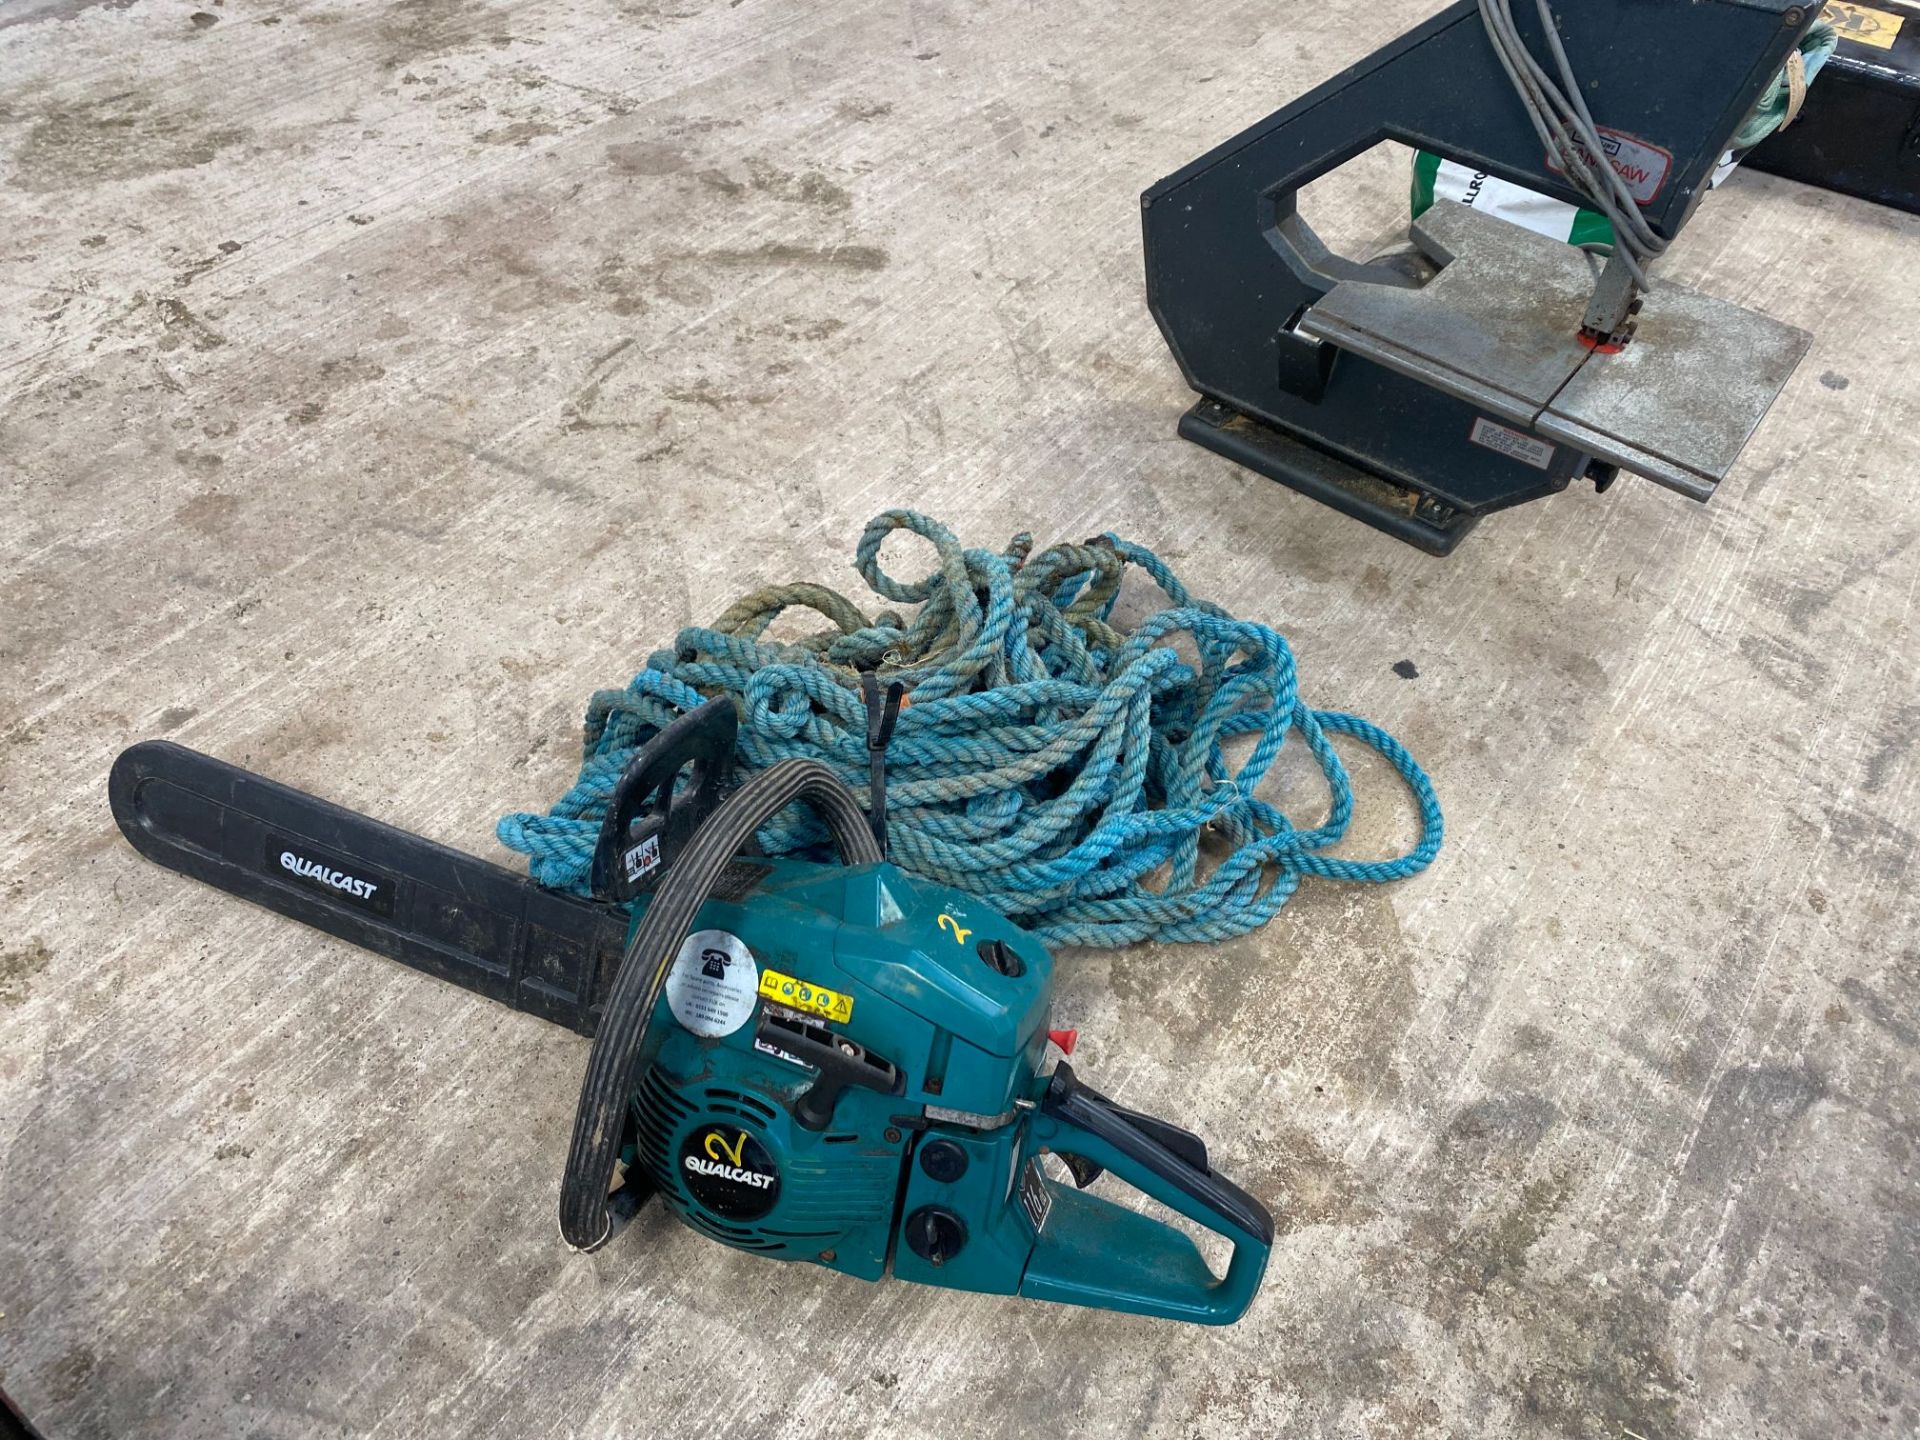 QUALCAST CHAINSAW & ROPE